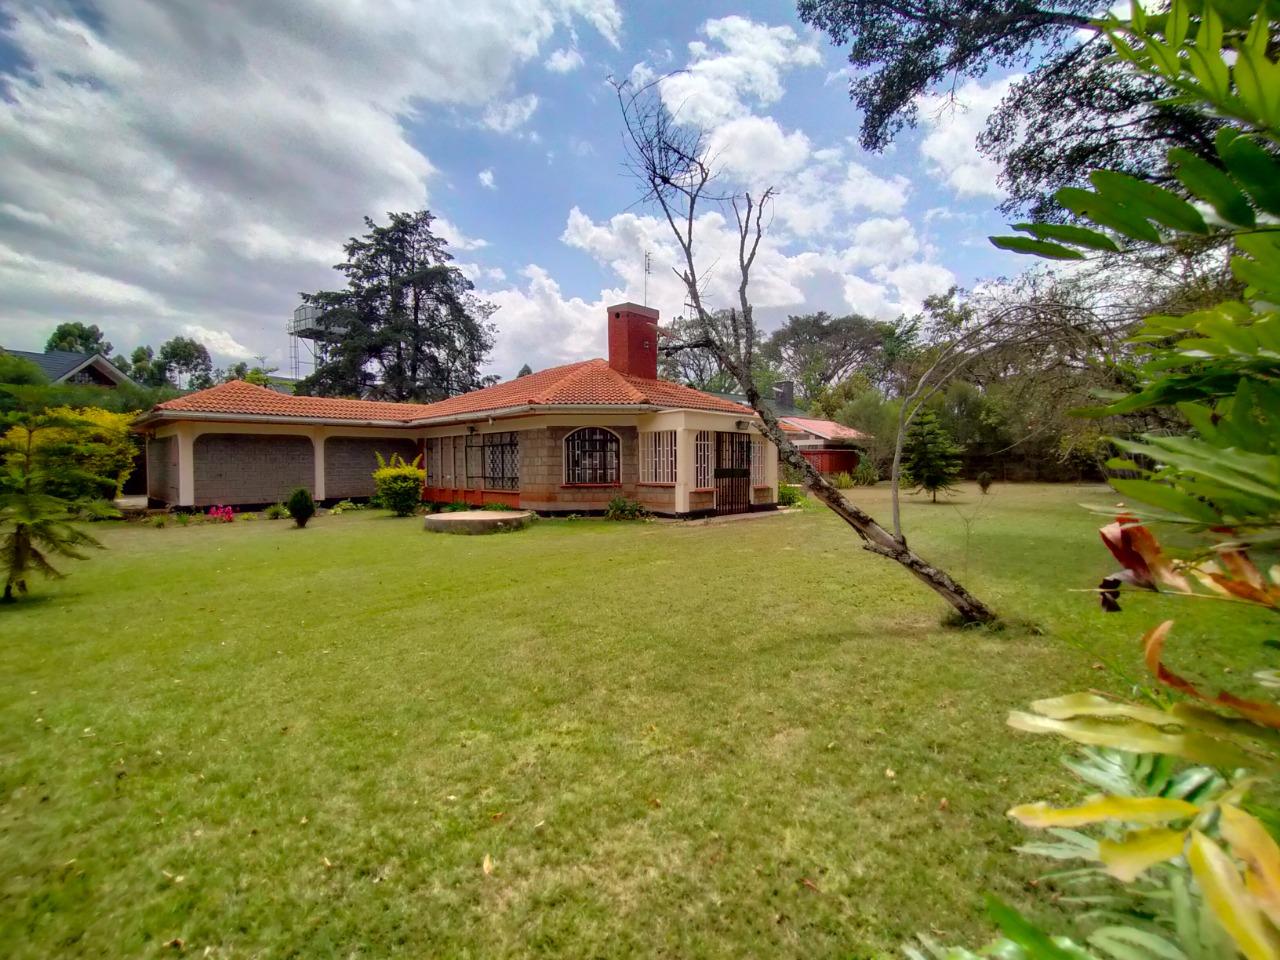 Urgent Sale: 3 bedroom Bangalow plus dsq seated on 0.4 acre in Karen was previously 55M now 47M